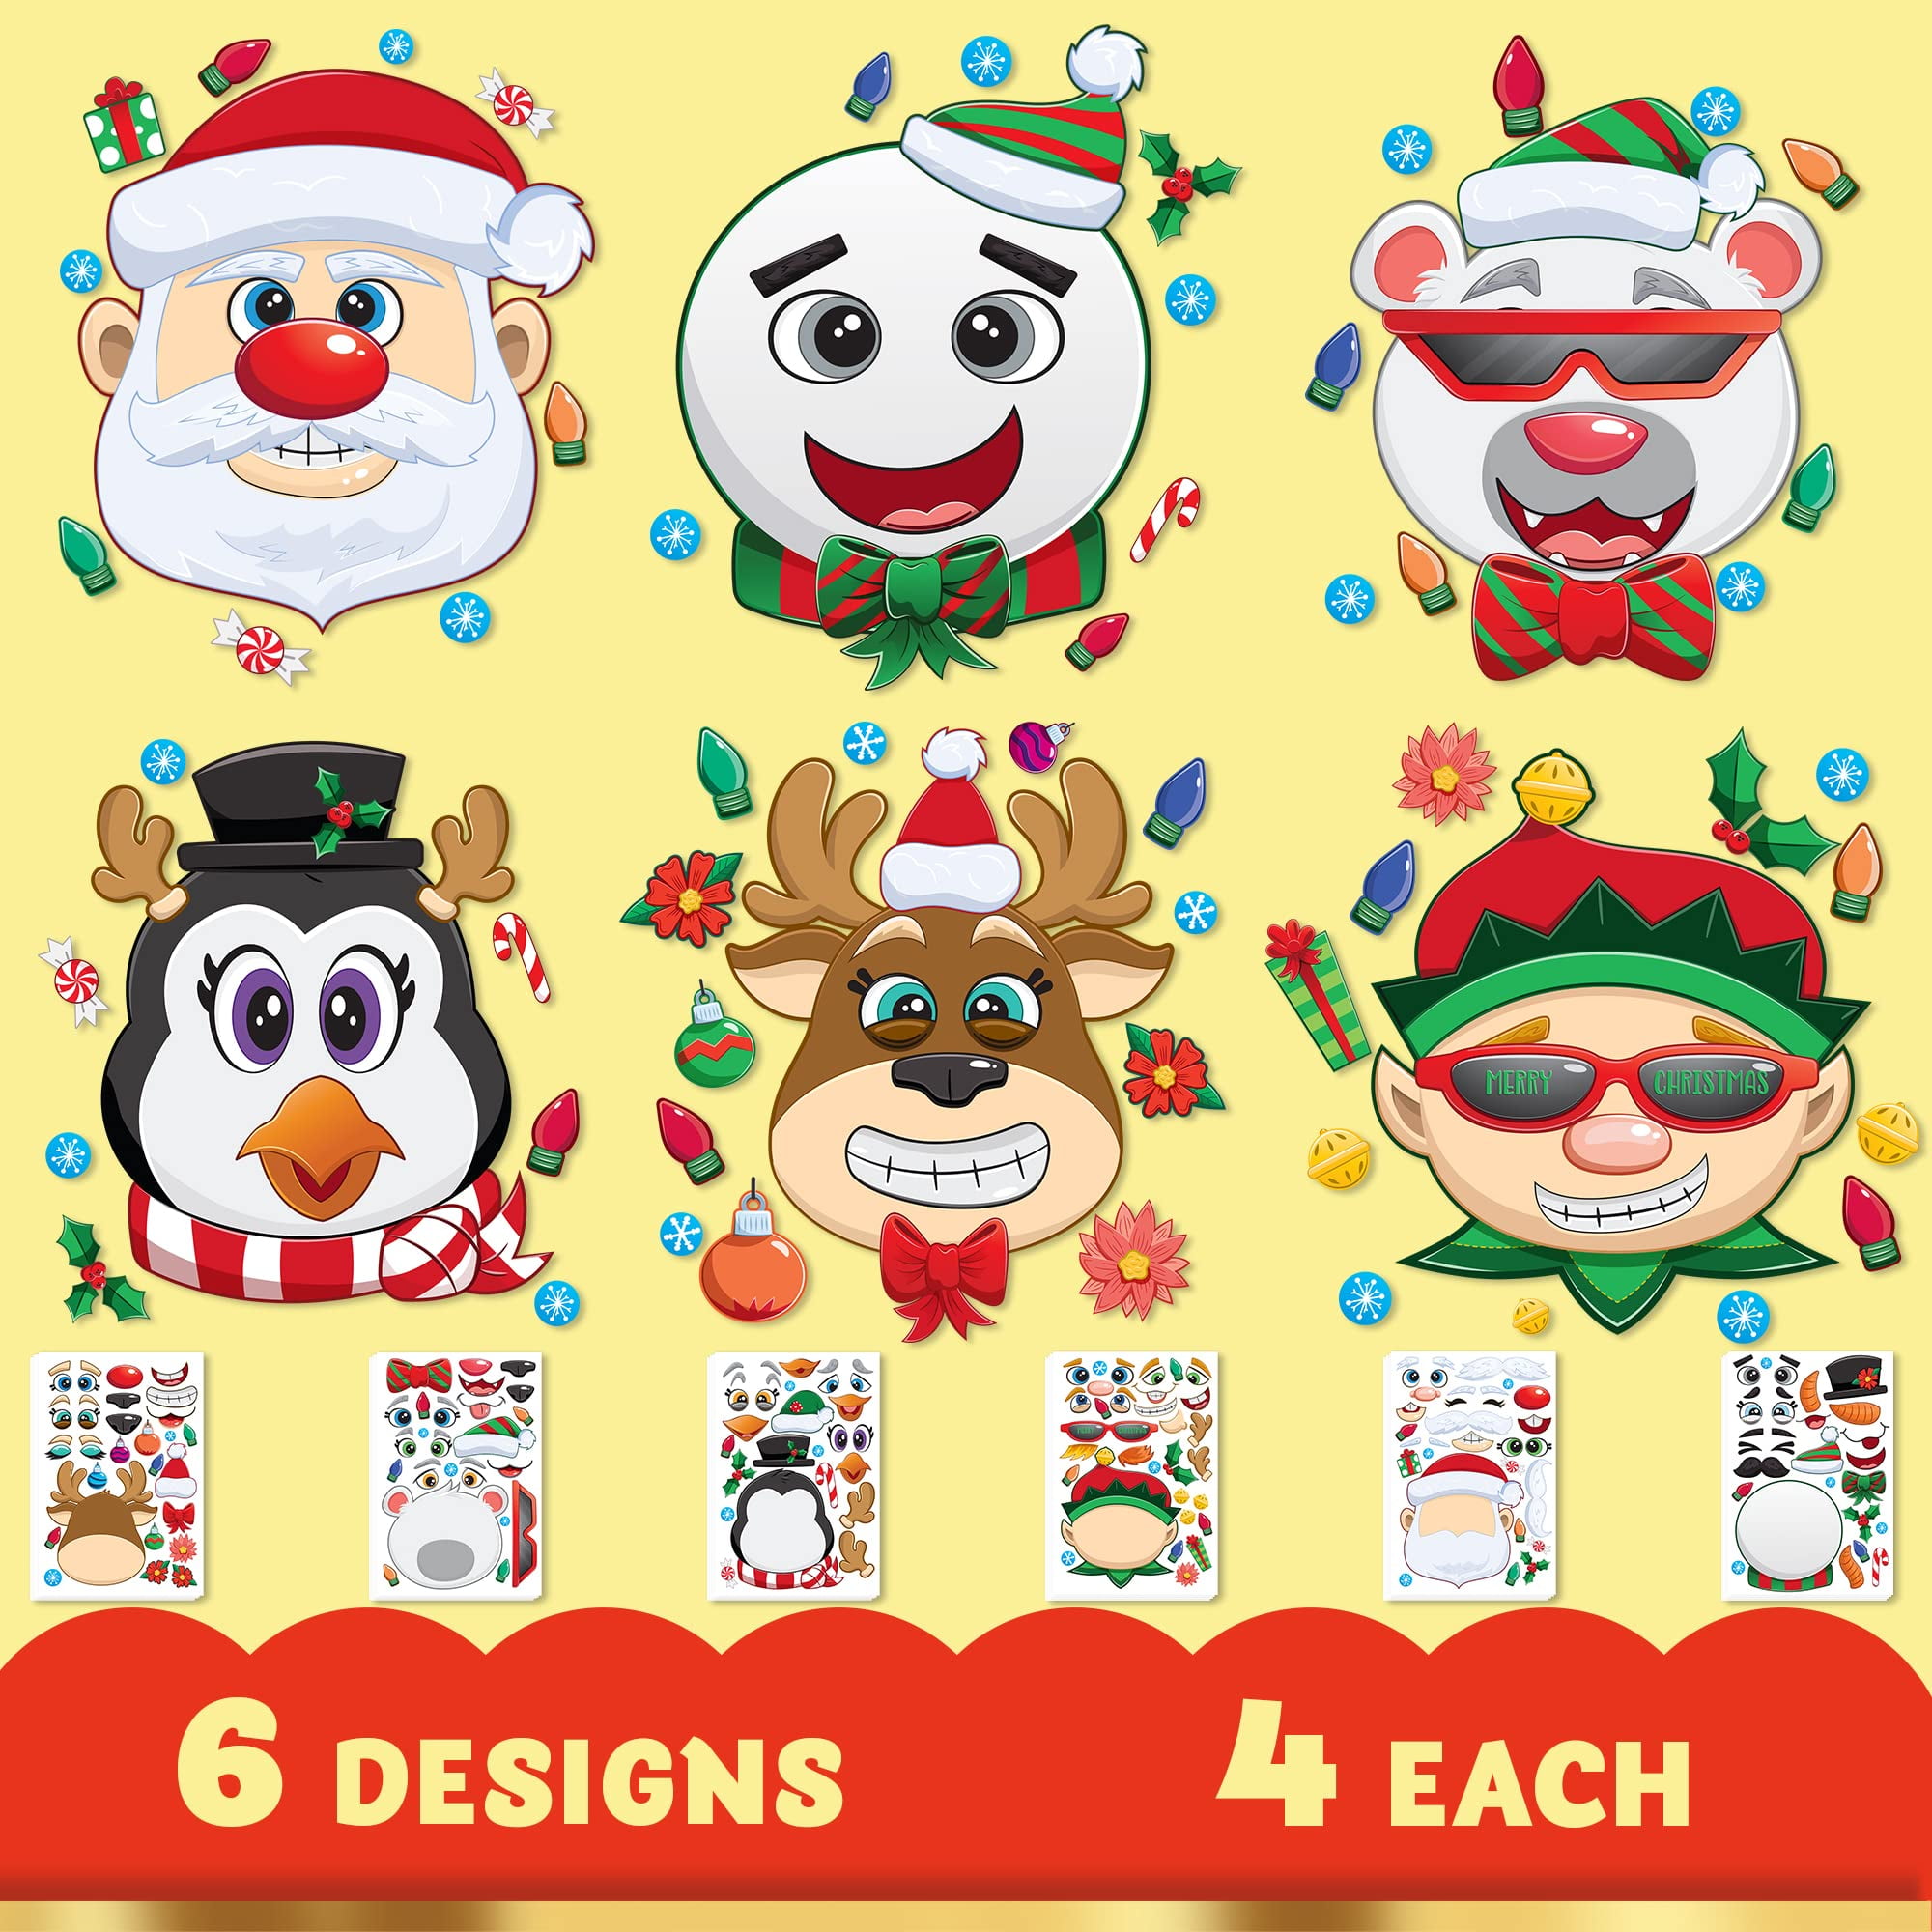 Vector Set Of Funny Christmas Gift Tags For Presents With Children's  Smiling Faces. Boys And Girls With Different Color Skin, Hairstyles, Braces  And Glasses. Royalty Free SVG, Cliparts, Vectors, and Stock Illustration.